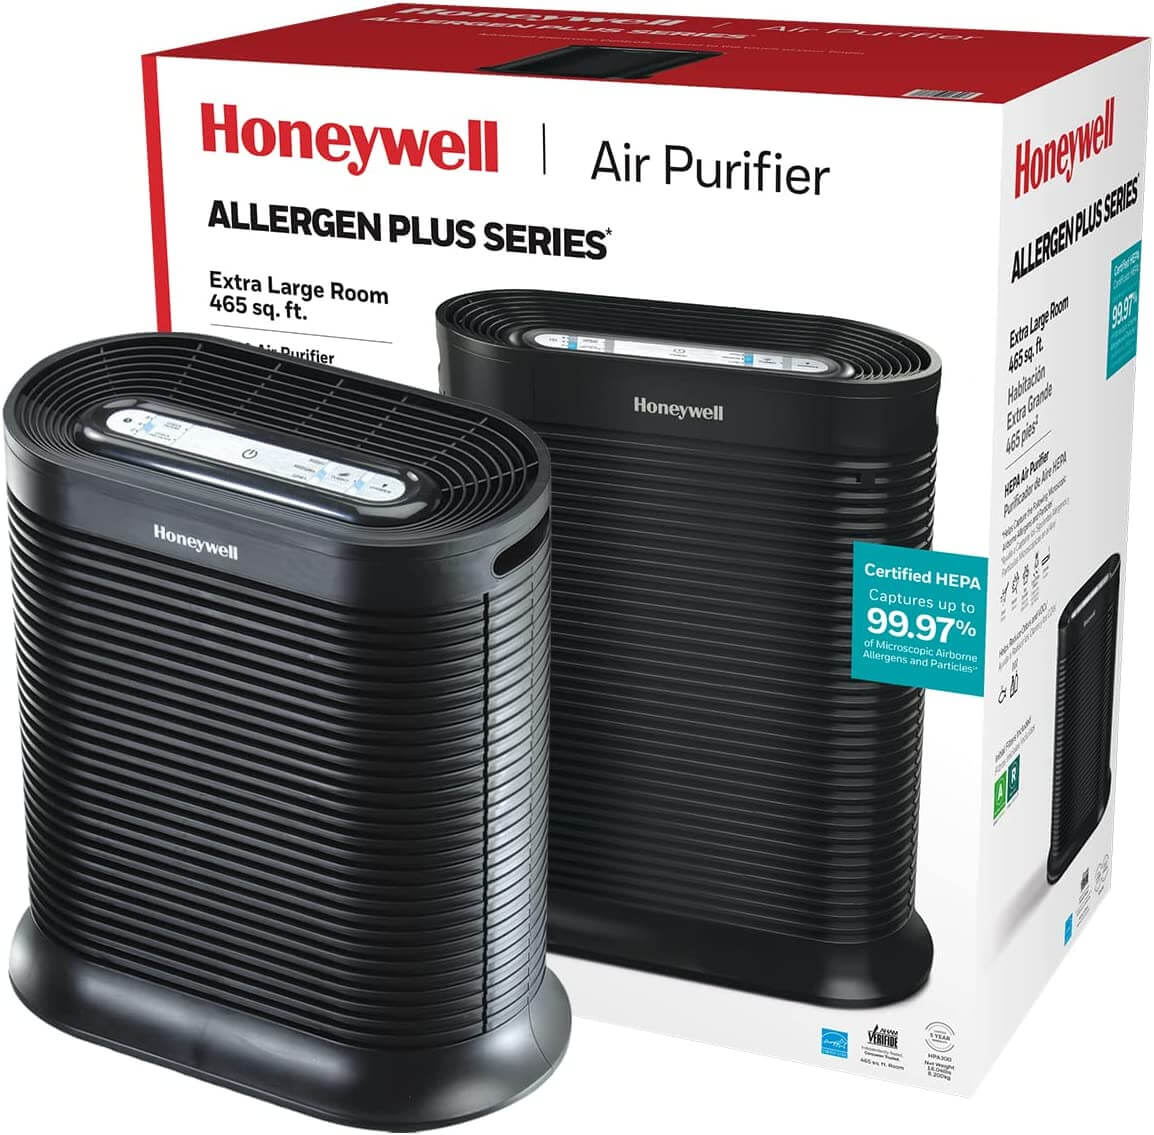 black air purifier next to red and white box